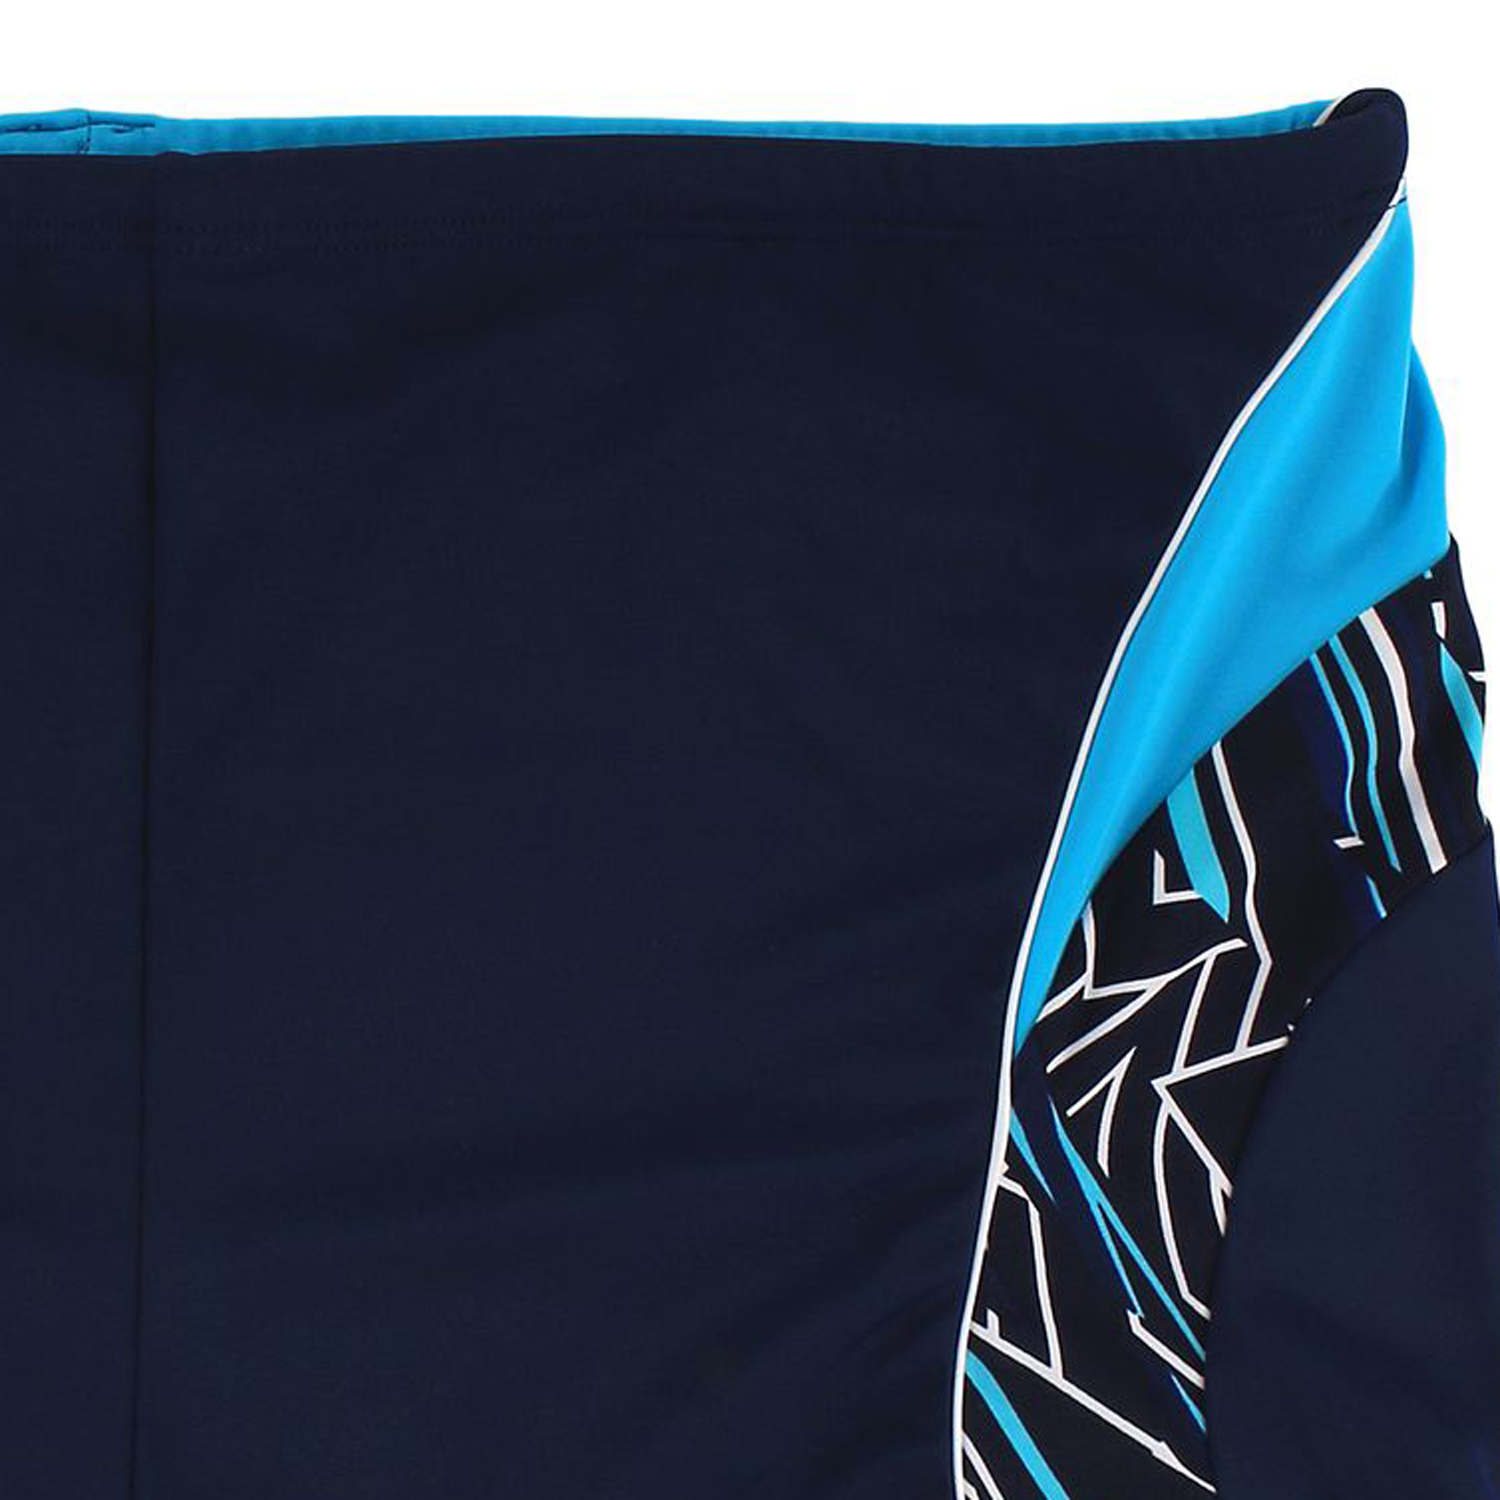 Swimming pants in navy-turquoise by eleMar up to oversize 10XL